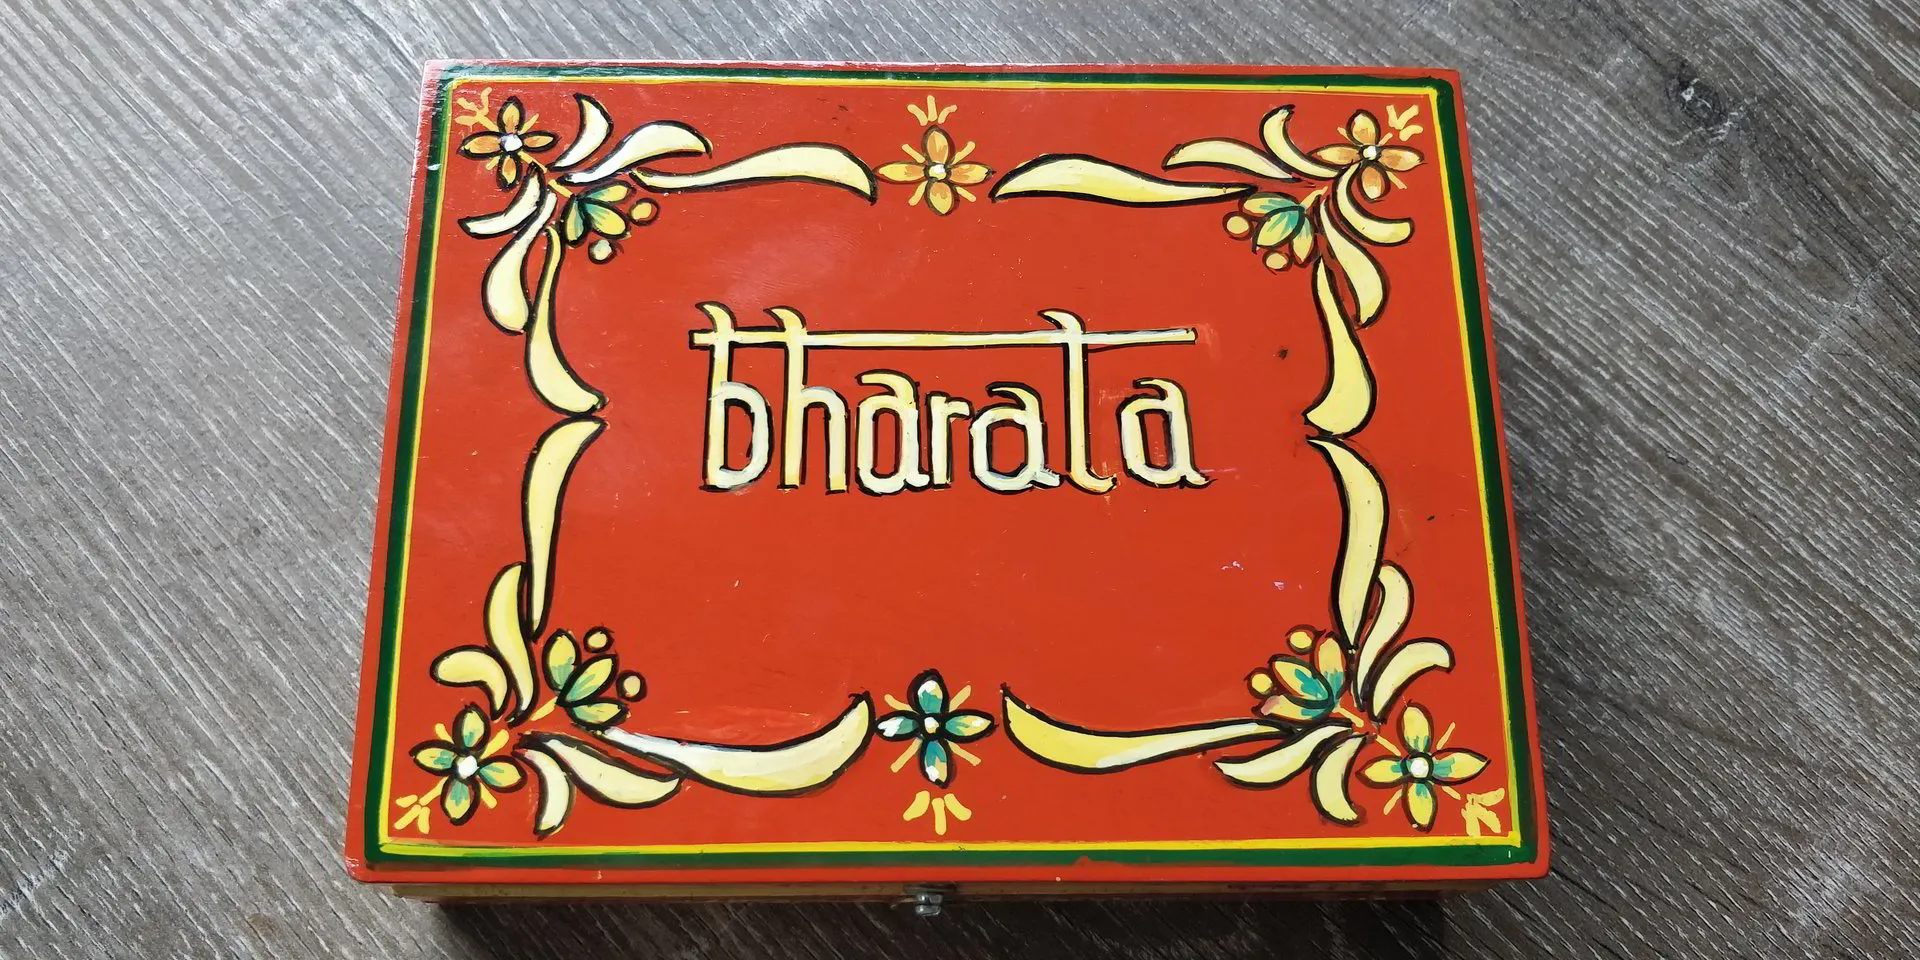 Bharata Collector's Edition box - Handpainted and lacqueured exclusive wooden box